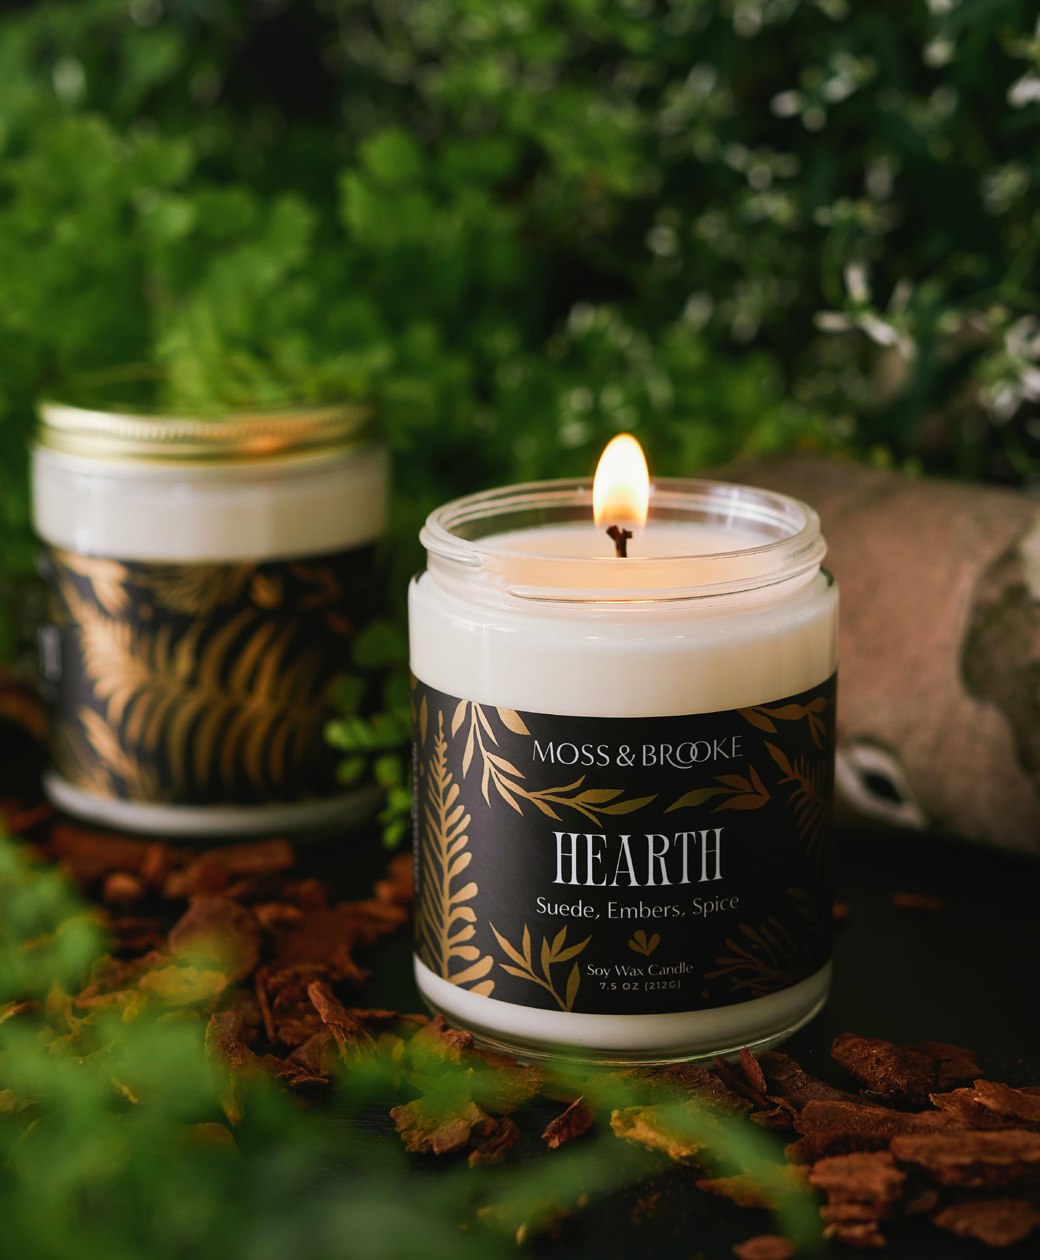 Moss and Brooke brand identity shown on custom candle packaging labels with gold foil